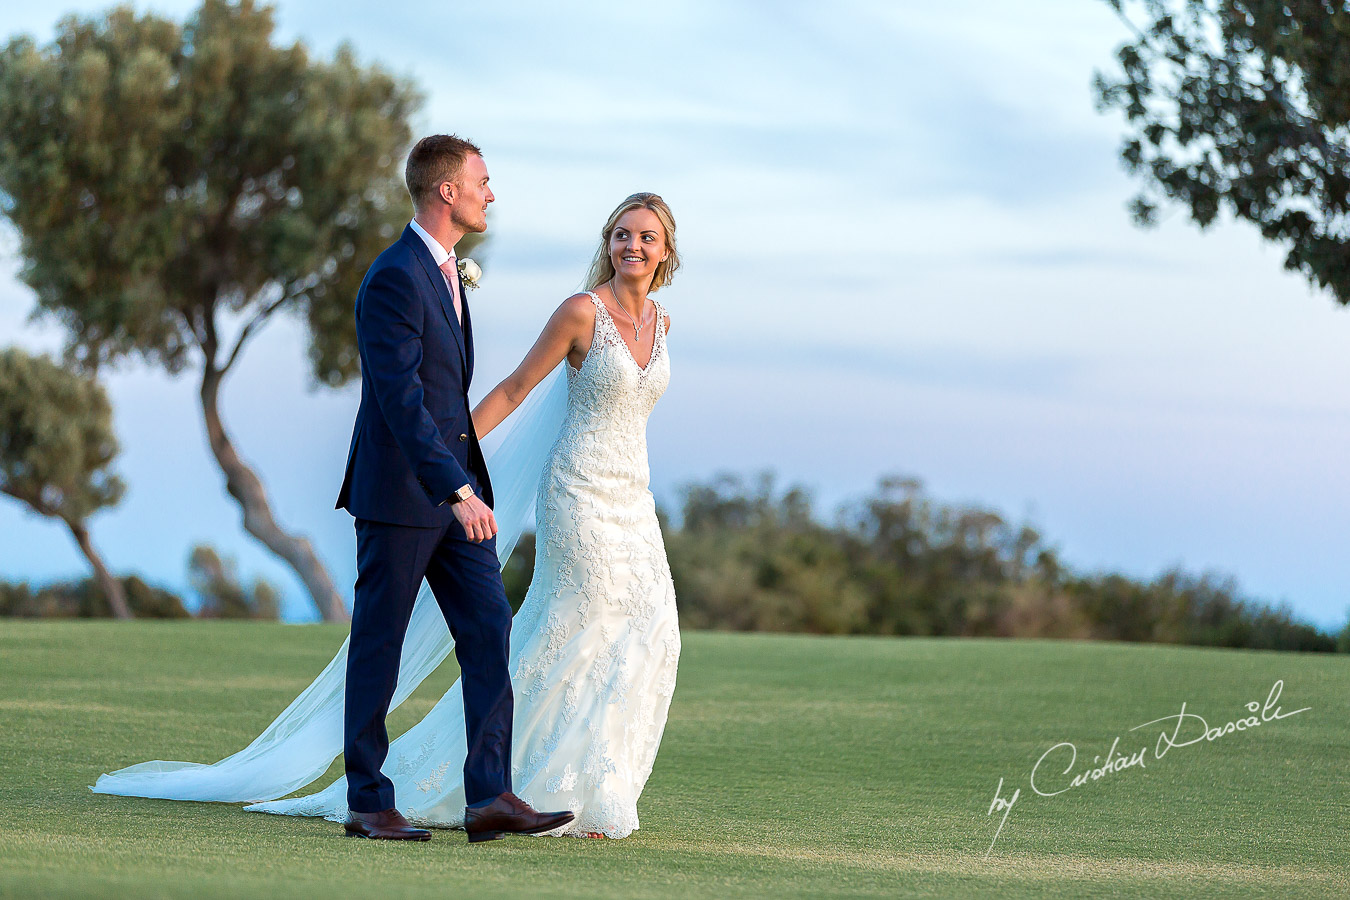 Sunset photoshoot moments captured by Cristian Dascalu at a wedding at The Aphrodite Hills Resort in Paphos, Cyprus.